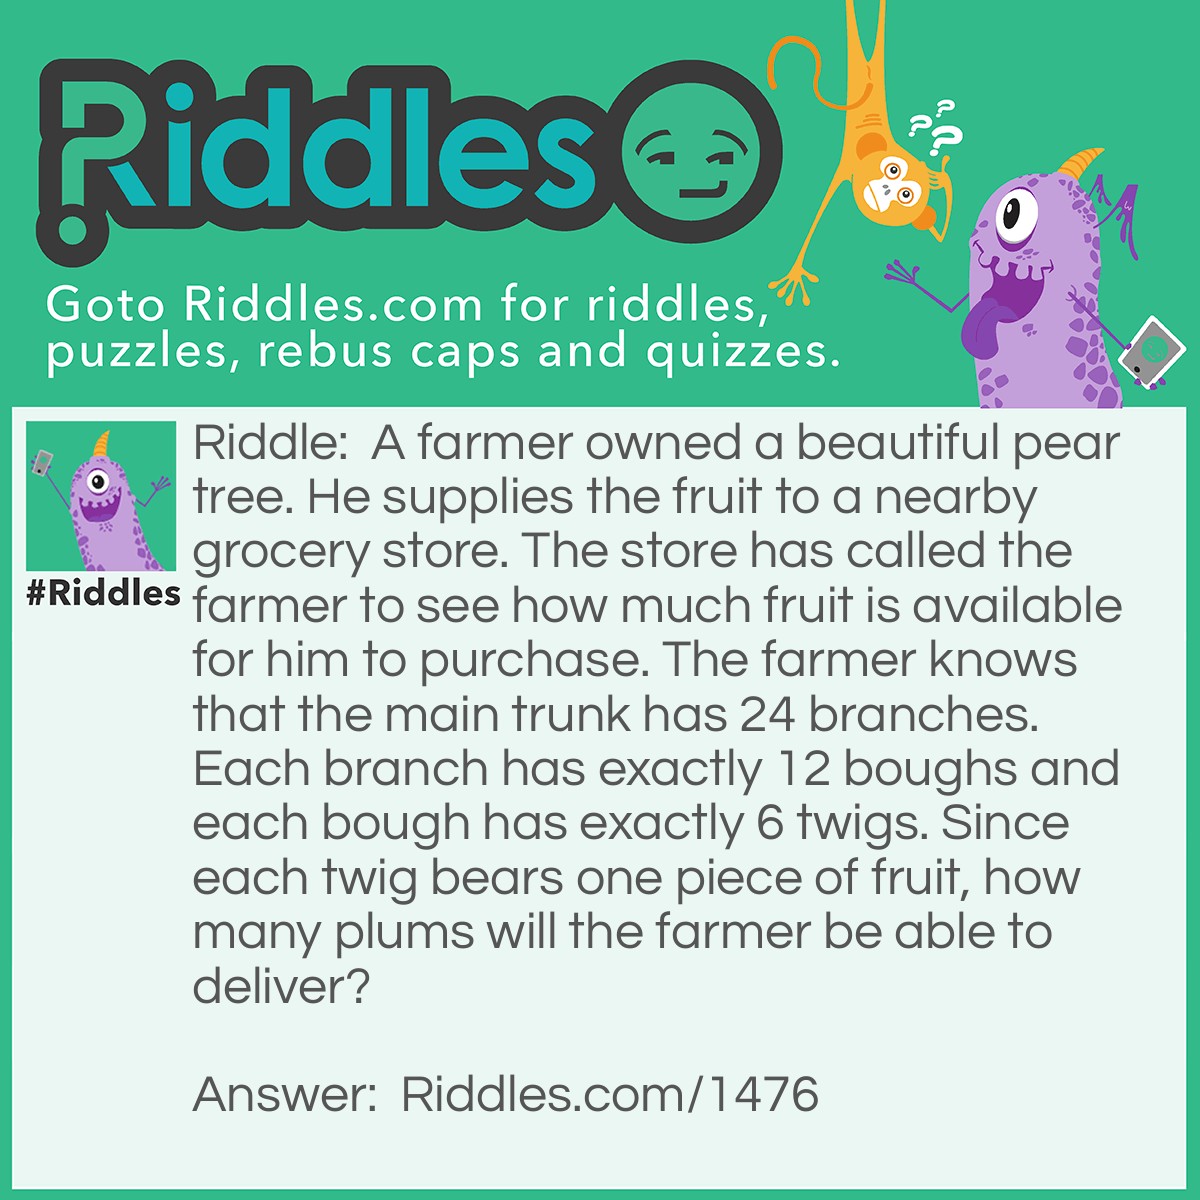 Riddle: A farmer owned a beautiful pear tree. He supplies the fruit to a nearby grocery store. The store has called the farmer to see how much fruit is available for him to purchase. The farmer knows that the main trunk has 24 branches. Each branch has exactly 12 boughs and each bough has exactly 6 twigs. Since each twig bears one piece of fruit, how many plums will the farmer be able to deliver? Answer: None. A pear tree does not bear plums.